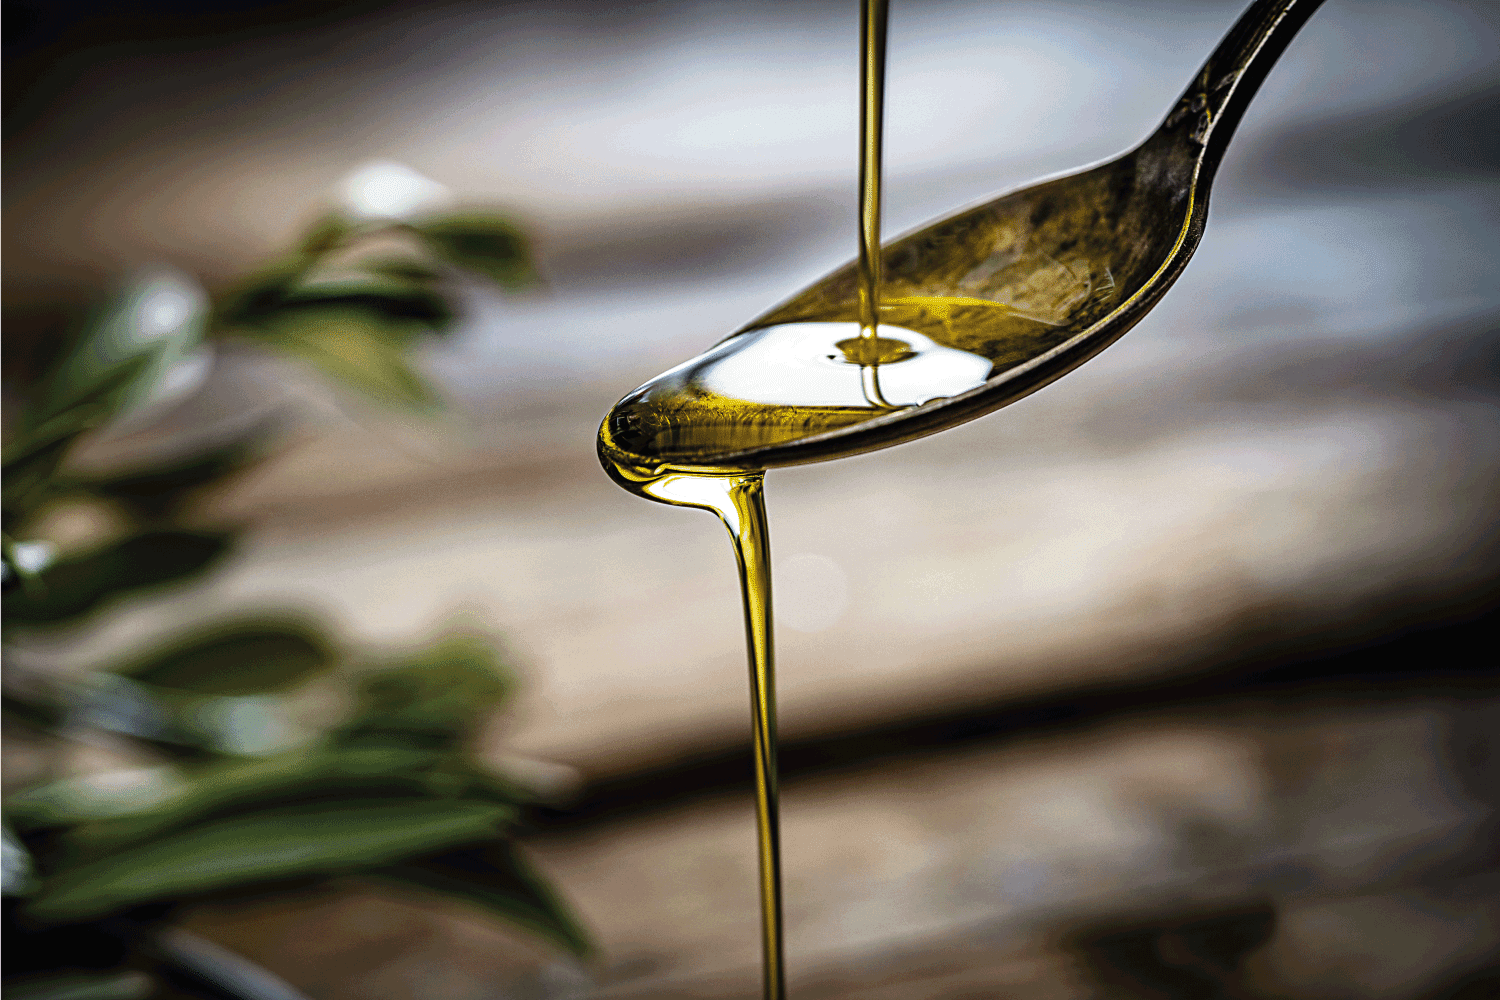 Pouring extra virgin olive oil on a vintage metal spoon